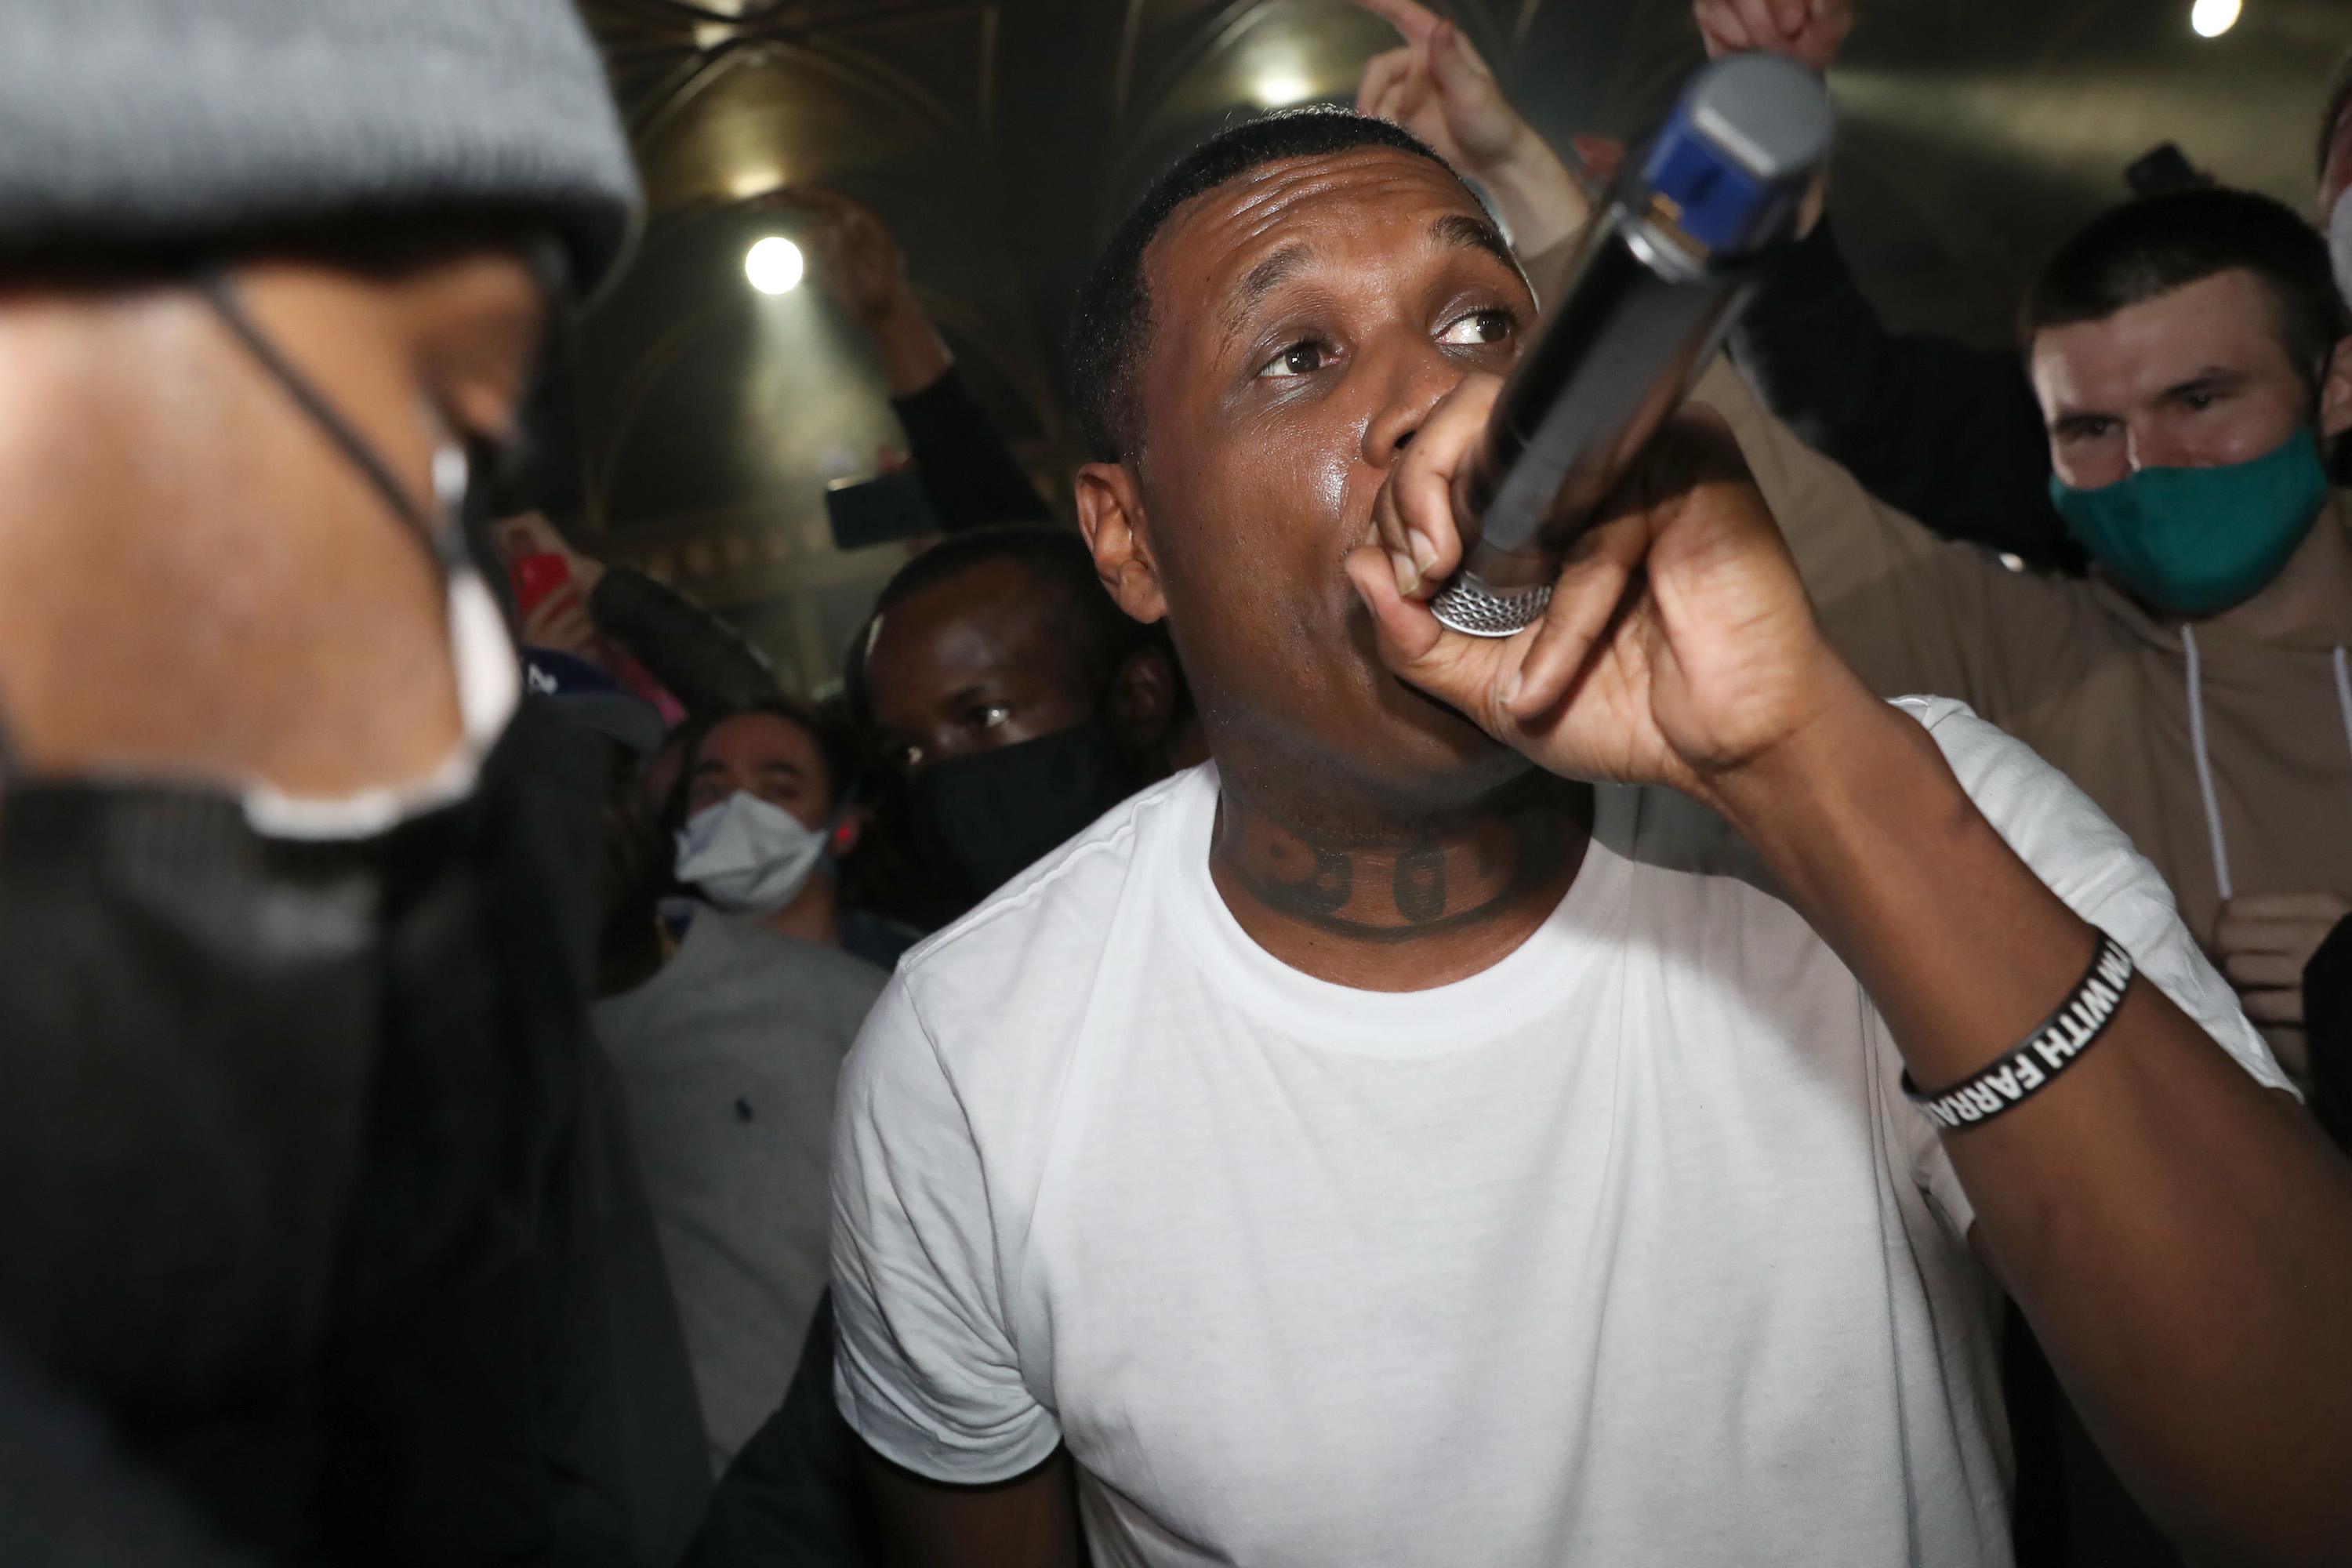 Rapper in a white tee performing with a mic, surrounded by an attentive crowd